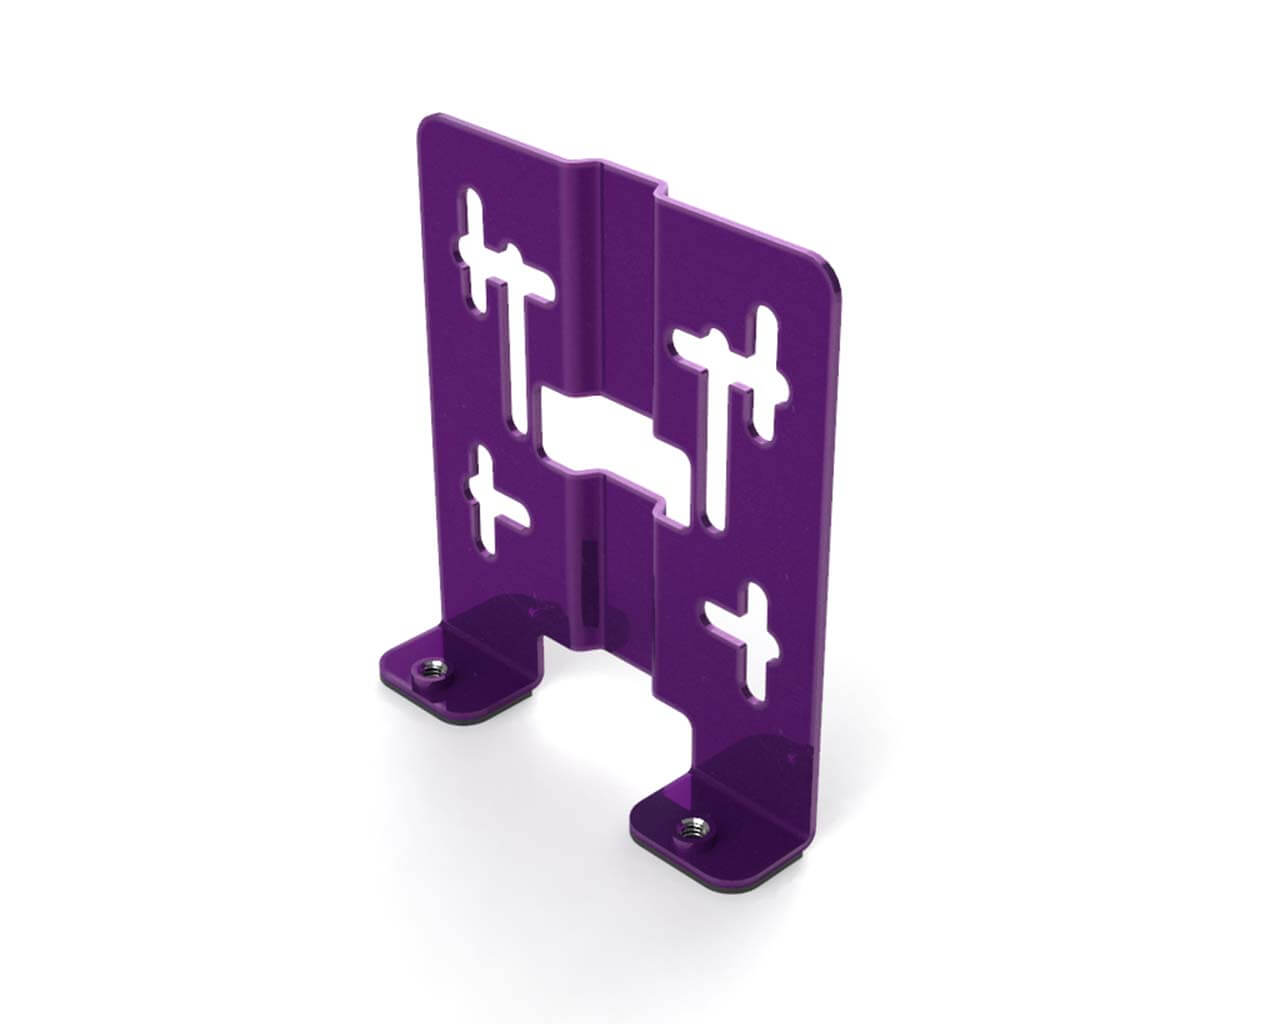 PrimoChill SX Universal Res/Pump Mount Bracket - PrimoChill - KEEPING IT COOL Candy Purple